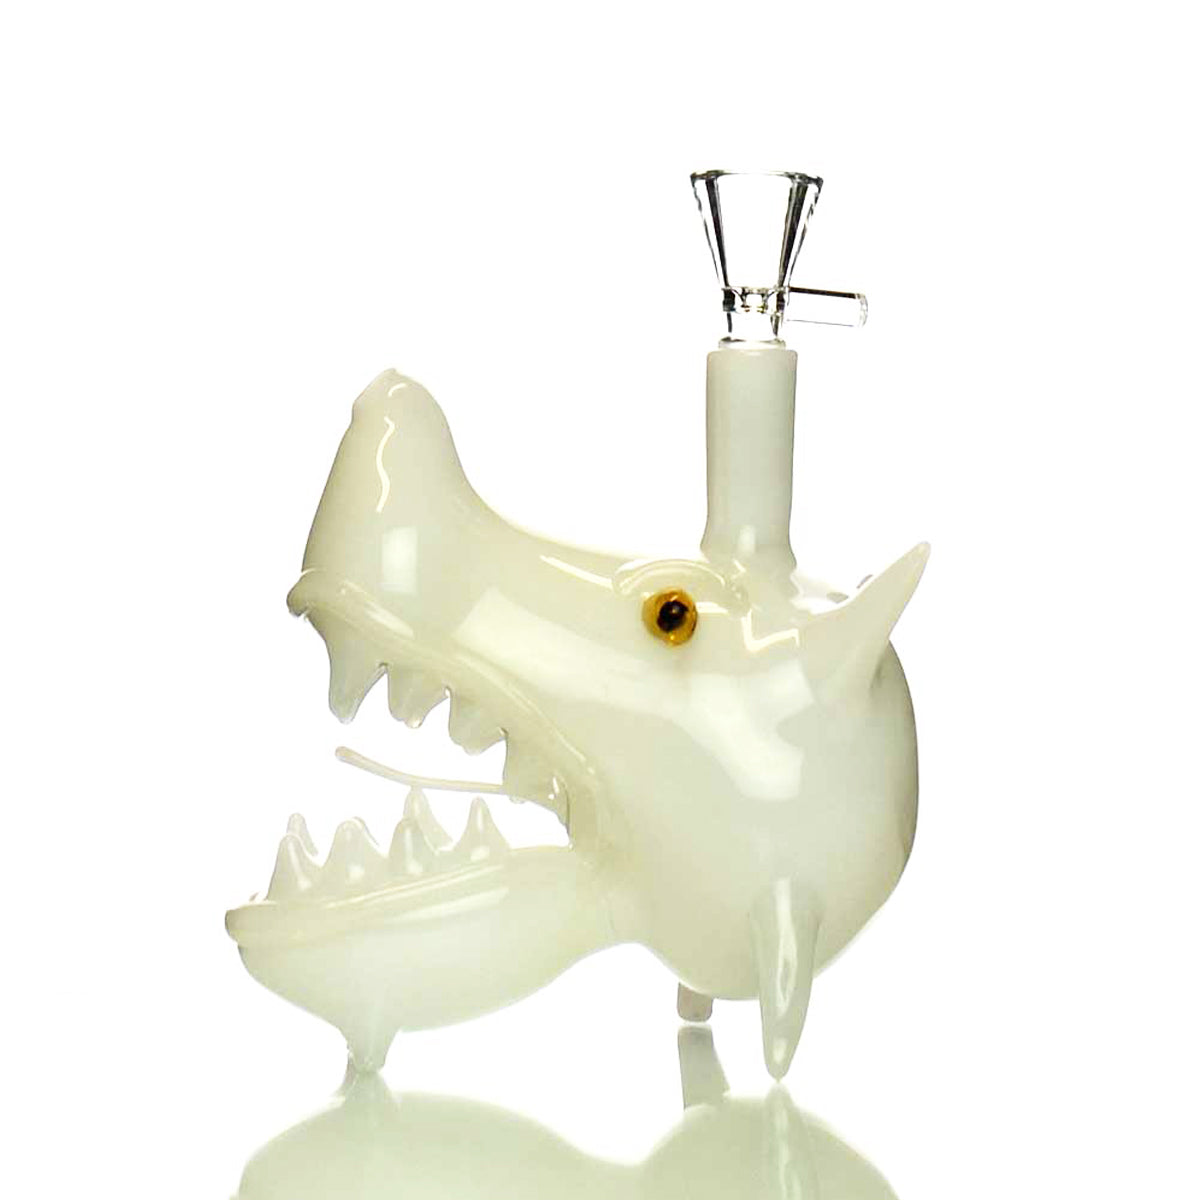 6" Dragon Face Water Pipe with 14mm Male Bowl